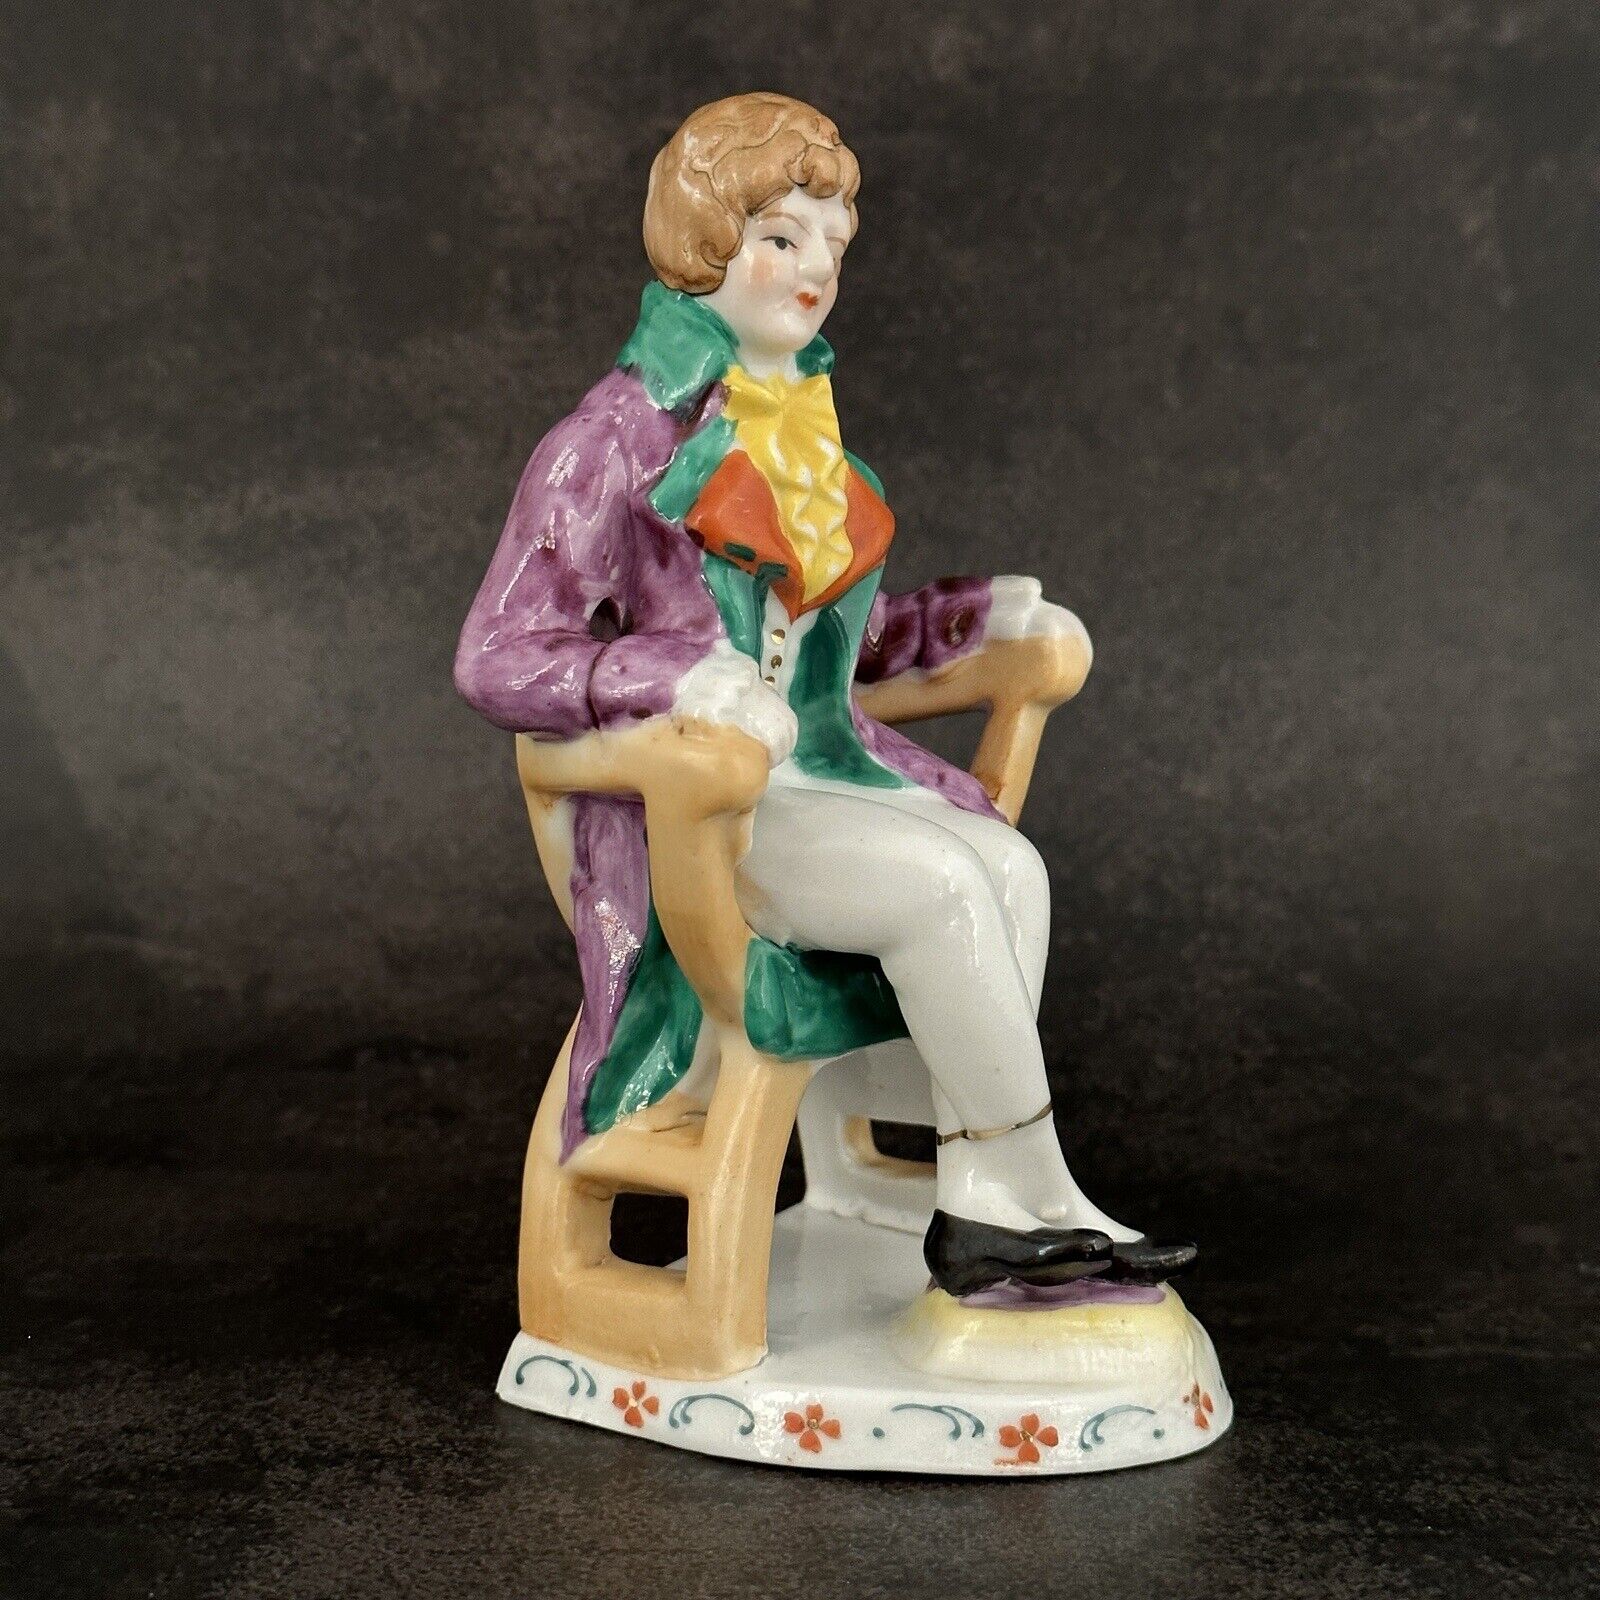 Vintage Porcelain Colonial Man Sitting in Chair Figurine Made In Japan